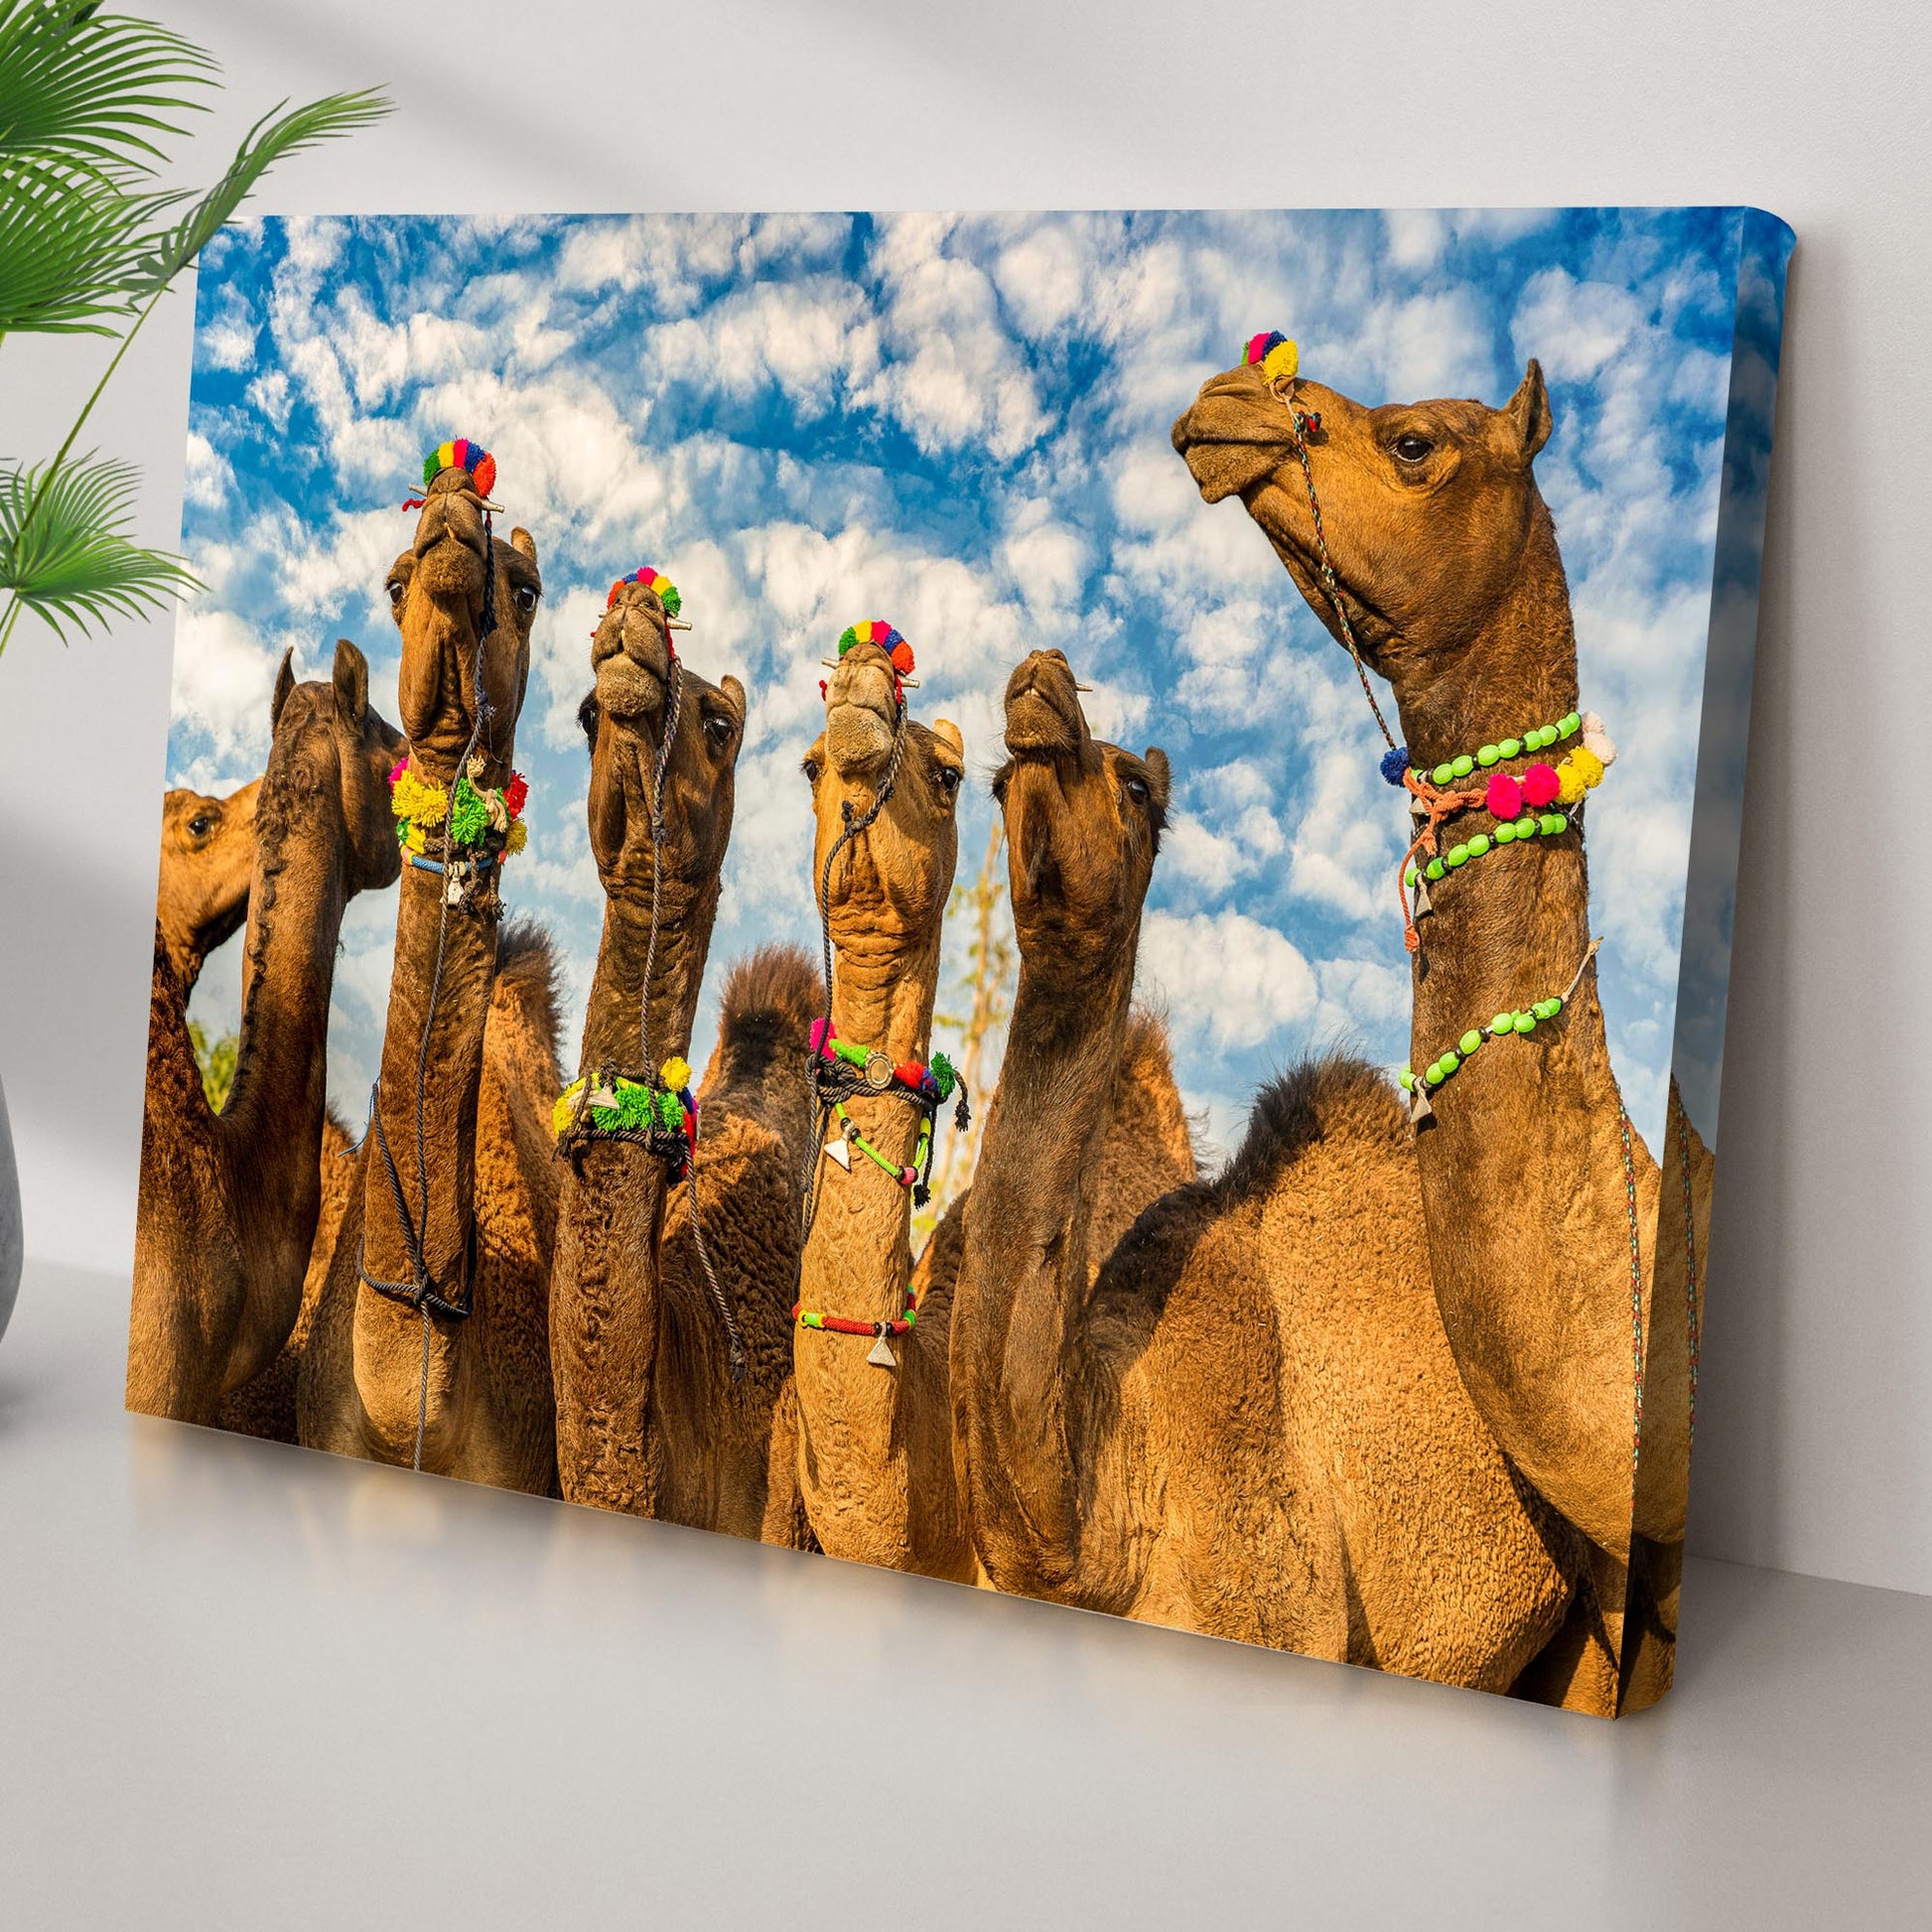 Pushkar Fair Camels Canvas Wall Art Style 1 - Image by Tailored Canvases